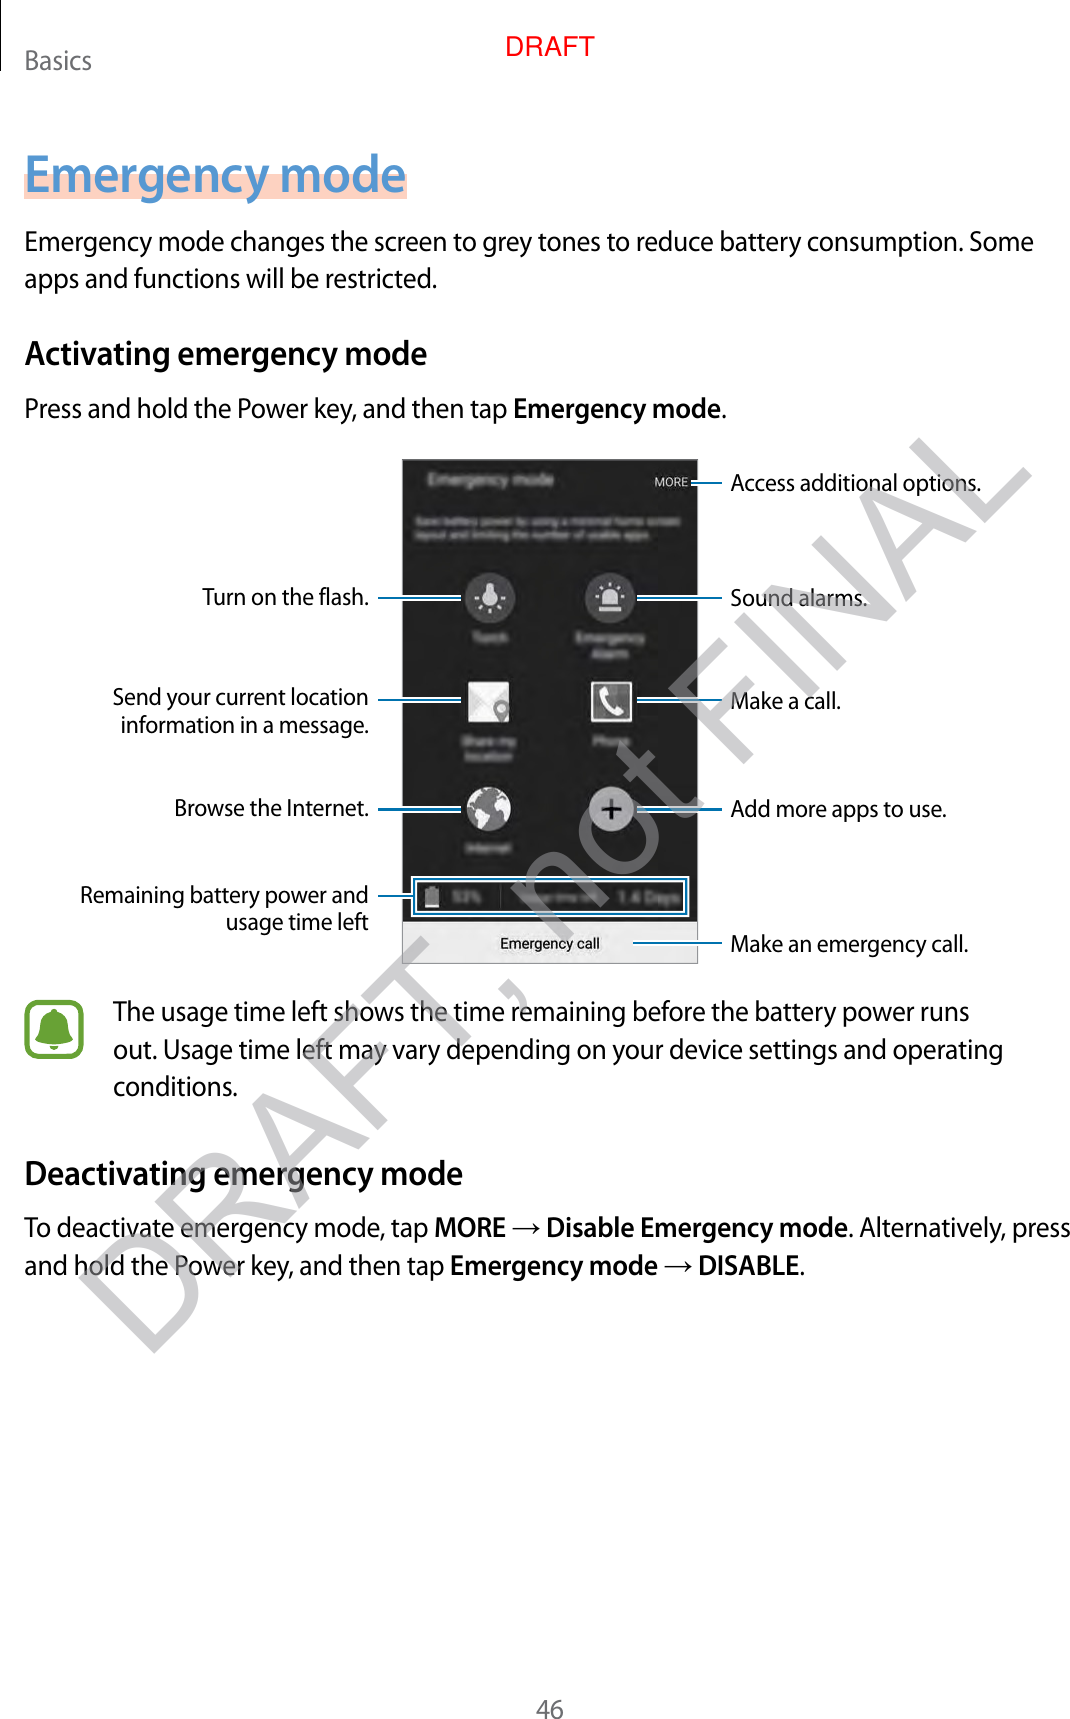 Basics46Emergency modeEmergency mode changes the screen to grey tones to reduce battery consumption. Some apps and functions will be restricted.Activating emergency modePress and hold the Power key, and then tap Emergency mode.Add more apps to use.Make an emergency call.Remaining battery power and usage time leftTurn on the flash.Make a call.Send your current location information in a message.Browse the Internet.Access additional options.Sound alarms.The usage time left shows the time remaining before the battery power runs out. Usage time left may vary depending on your device settings and operating conditions.Deactivating emergency modeTo deactivate emergency mode, tap MORE → Disable Emergency mode. Alternatively, press and hold the Power key, and then tap Emergency mode → DISABLE.DRAFT, not FINALDRAFT